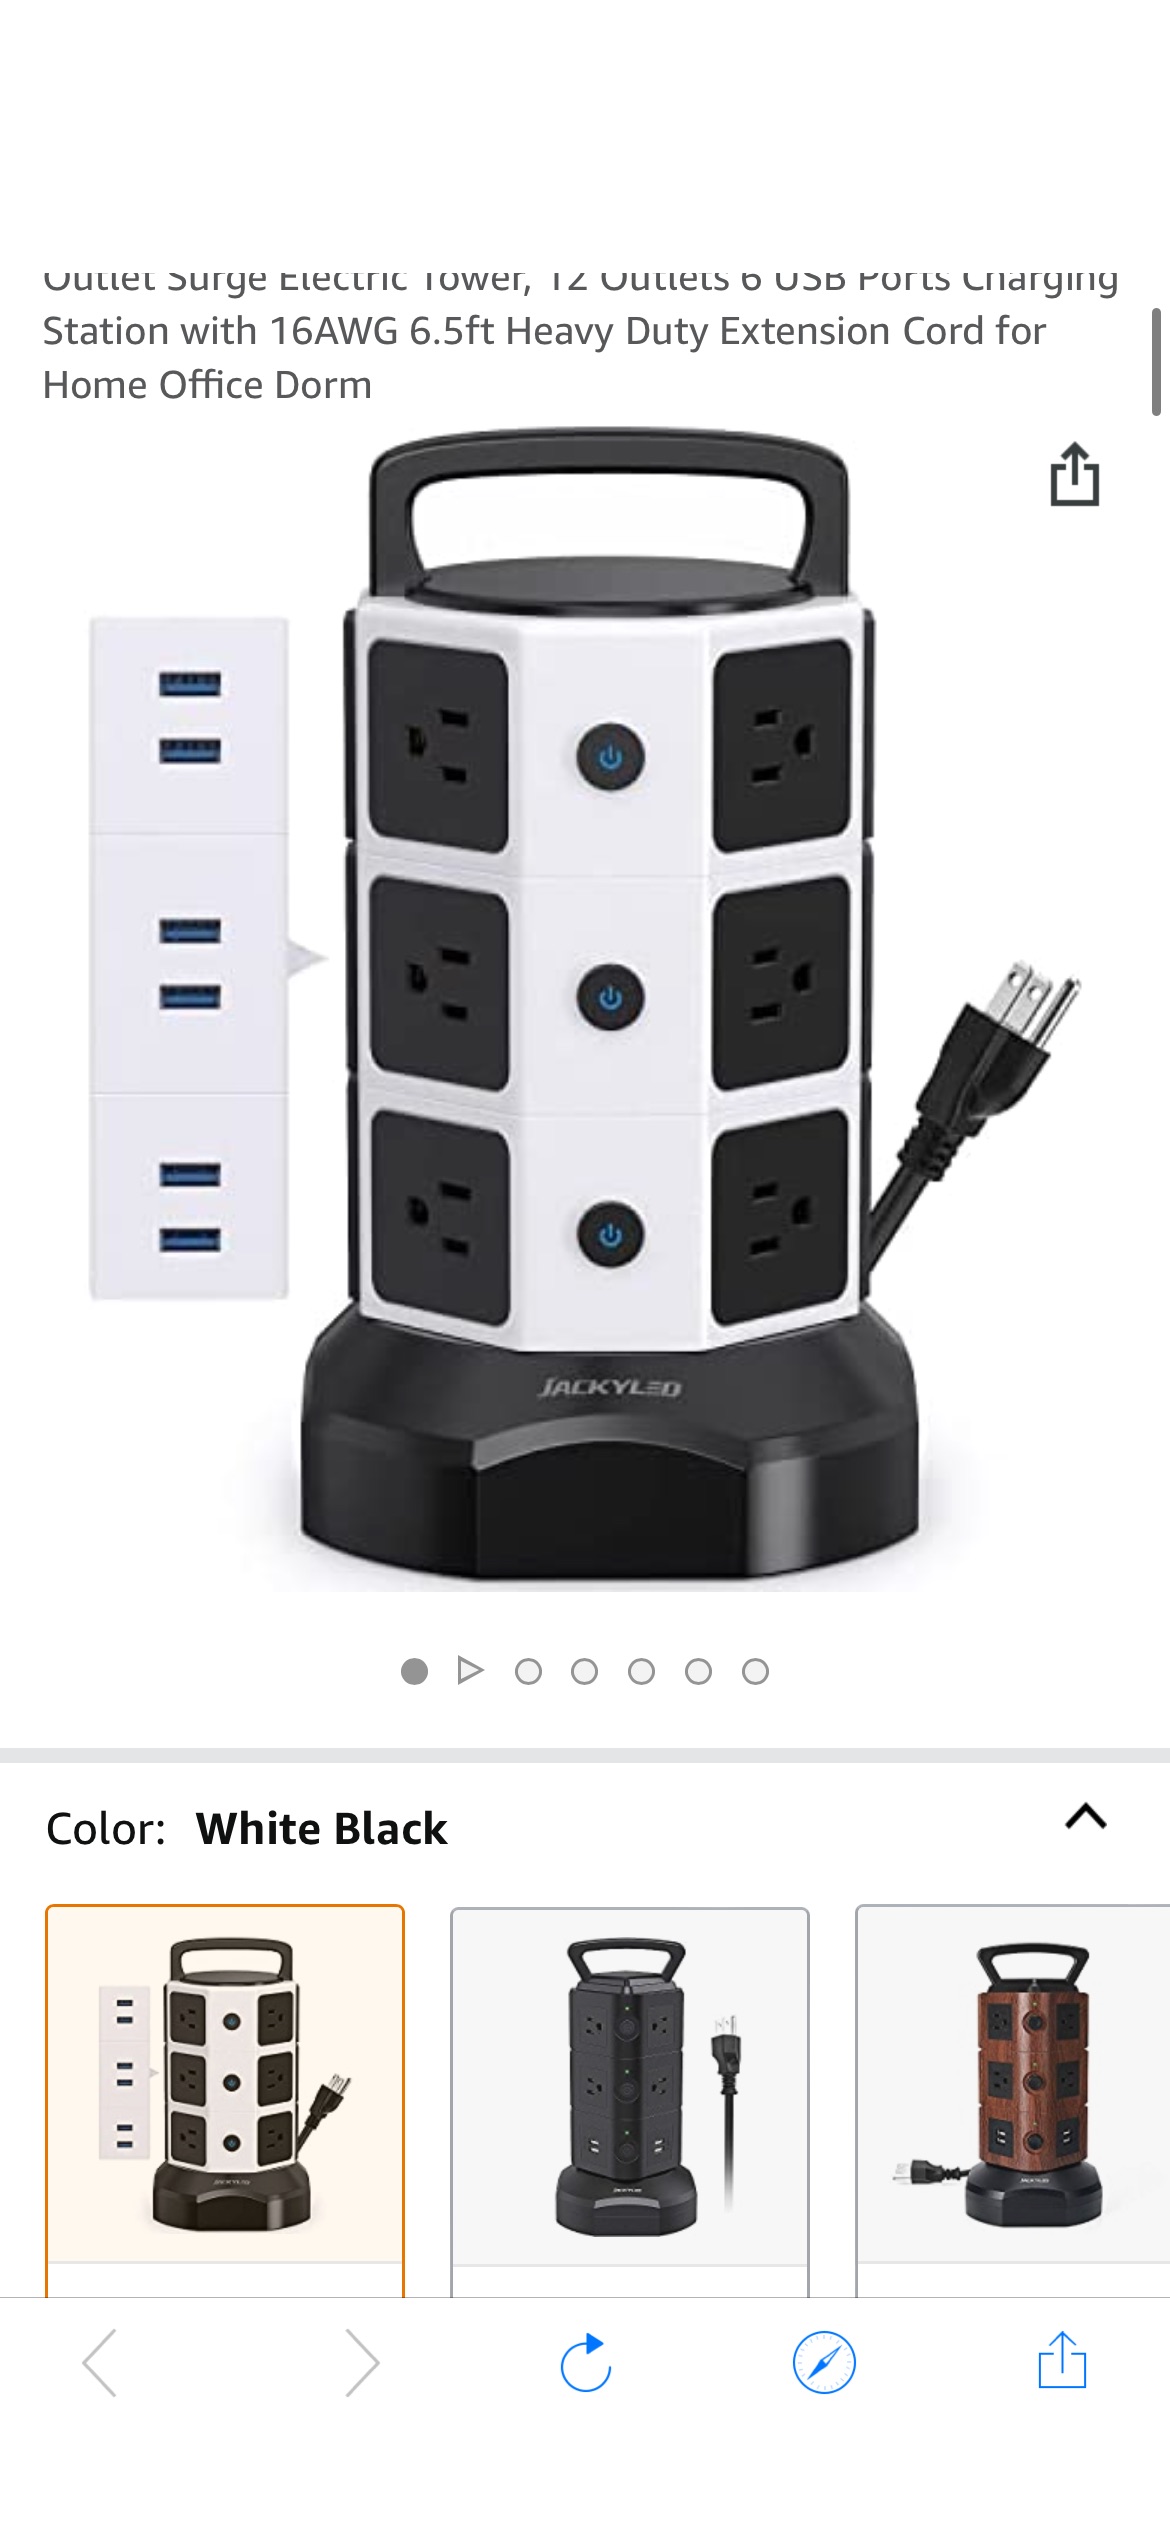 Amazon.com: PoweSurge Electric Tower, 12 Outlets 6 USB Ports Charging Station with 16AWG 6.5ft Heavy Duty Extension Cord for Home Office Dorm : Electronics 插座